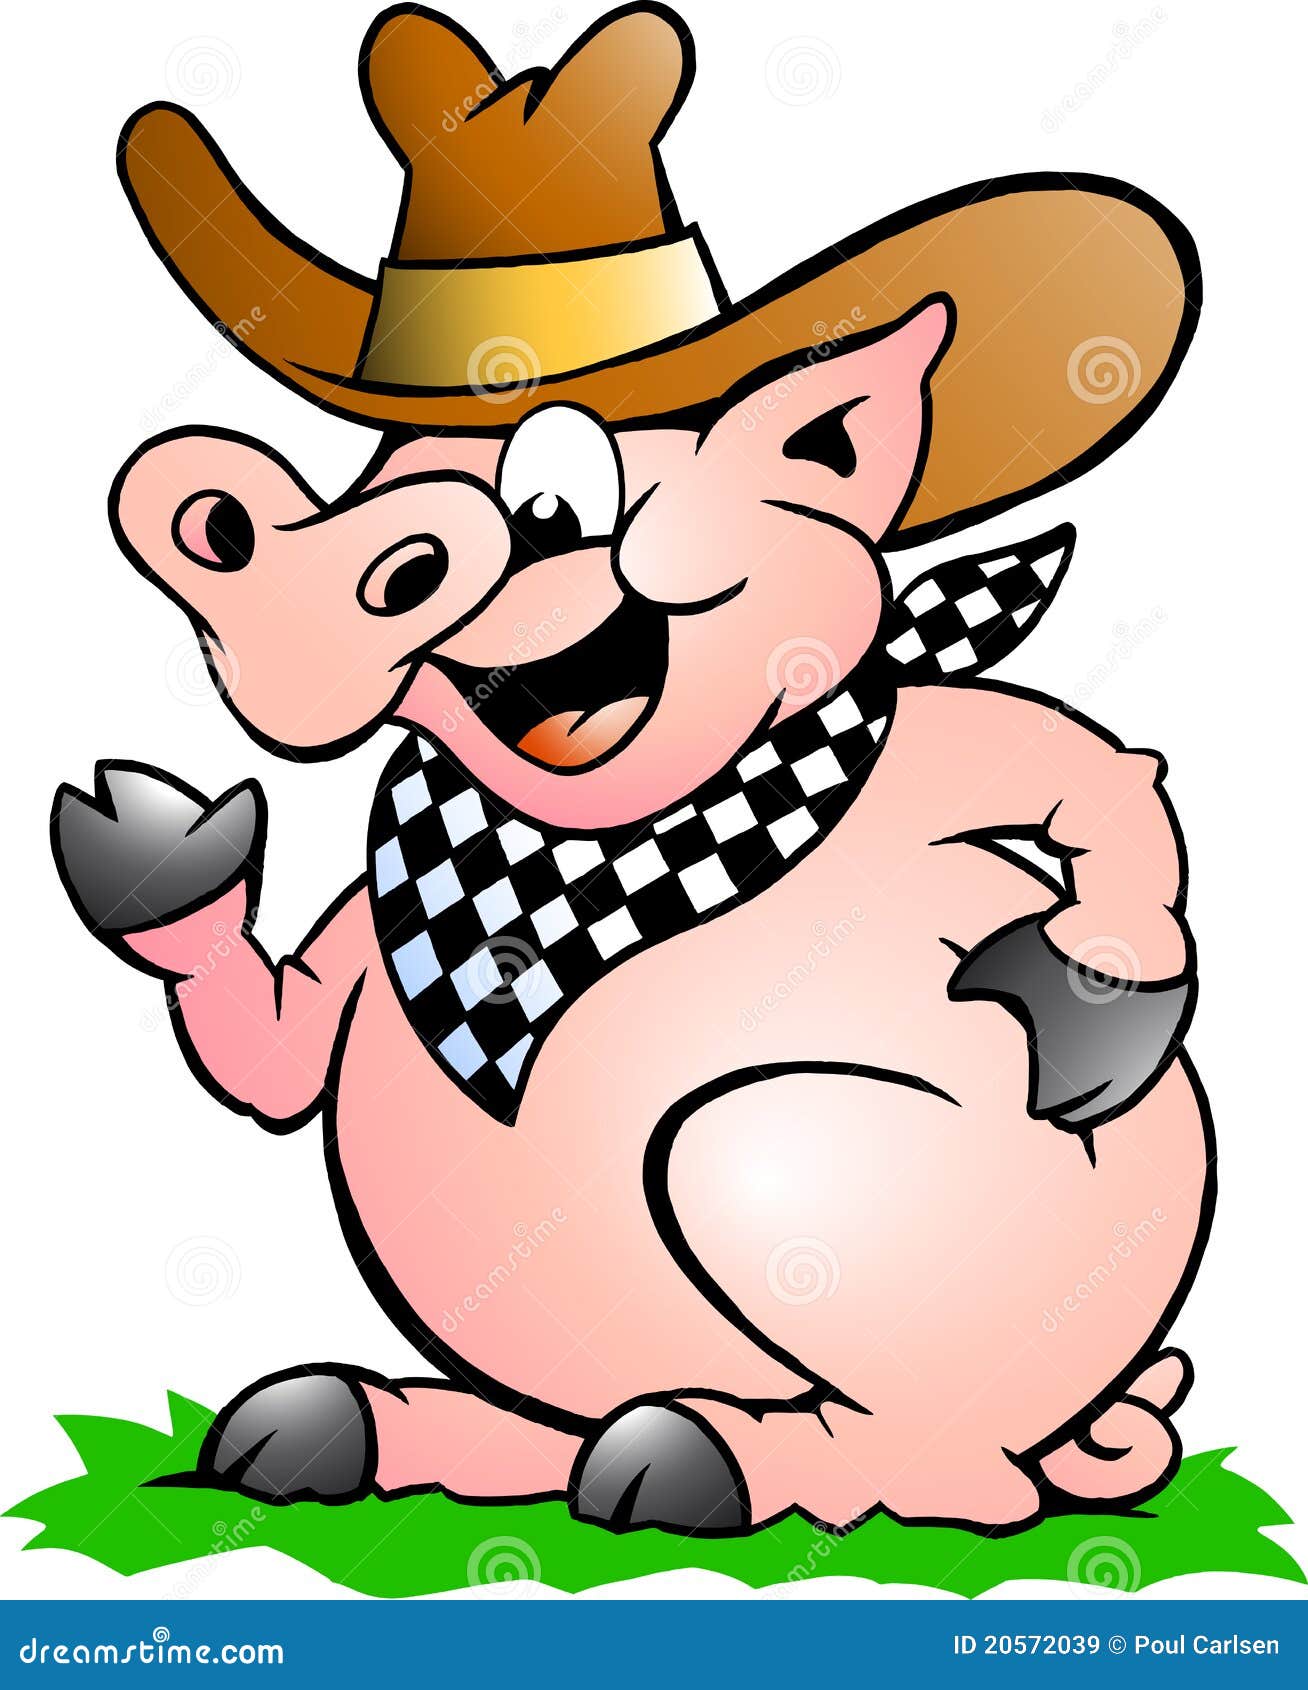 pig grilling clipart - photo #28